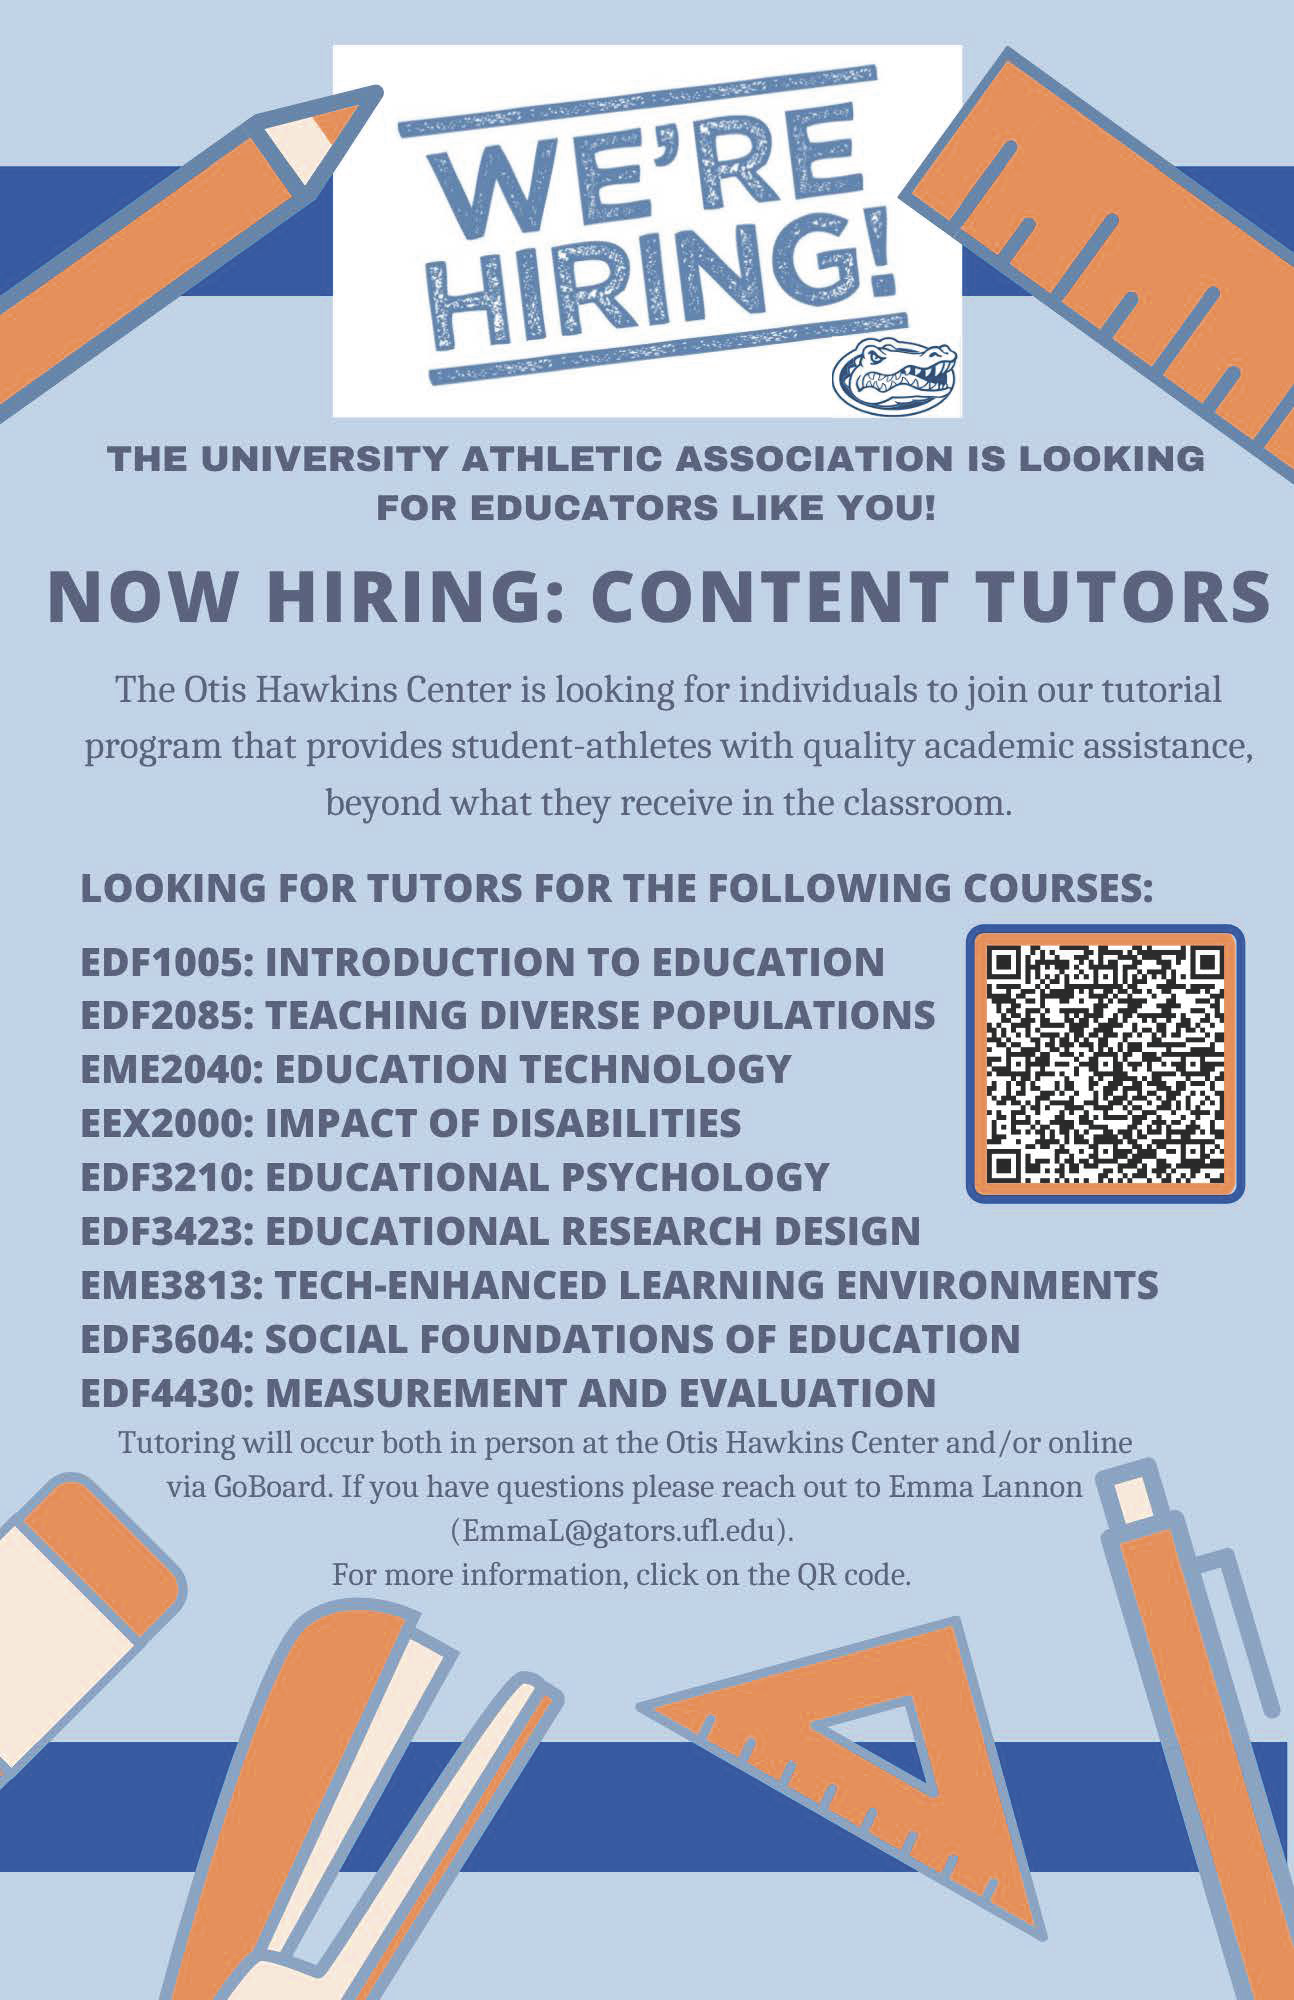 The University Athletic Association is hiring Content Tutors at The Otis Hawkins Center for multiple Educational Courses